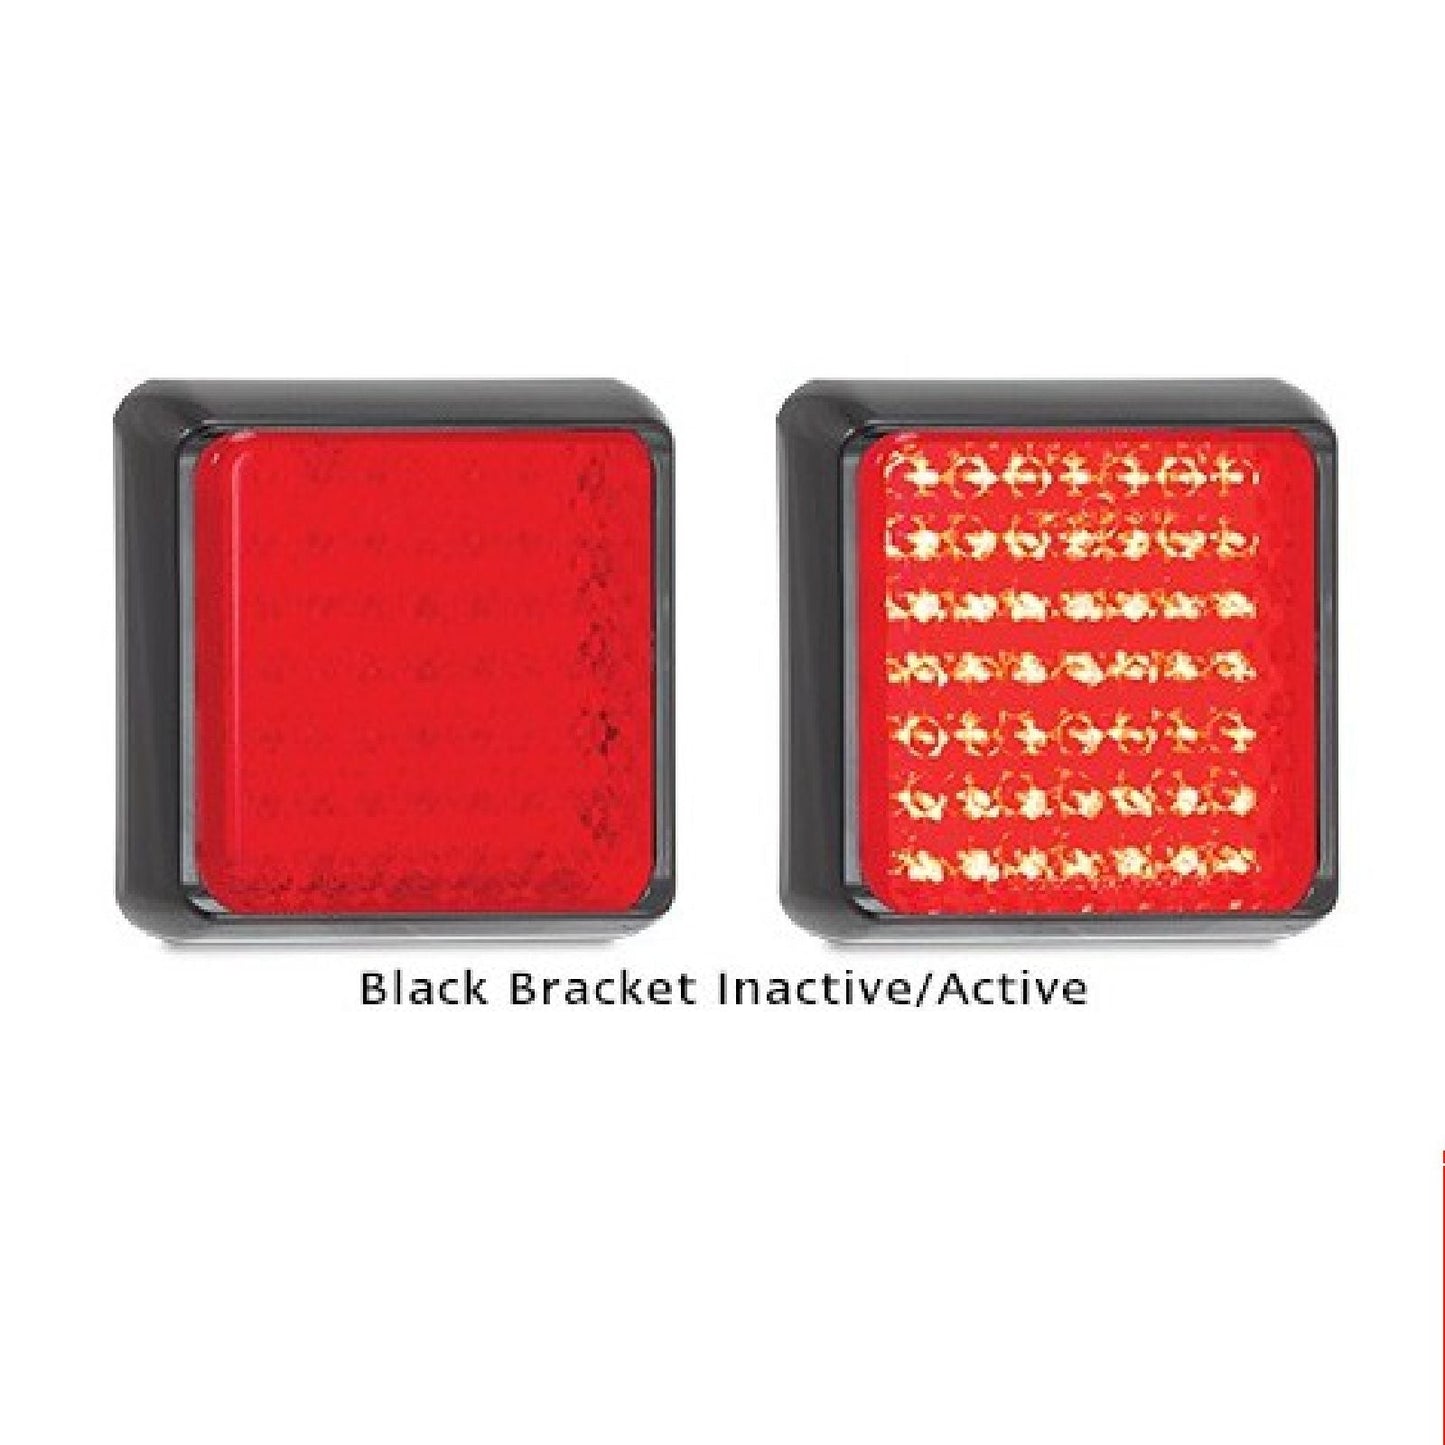 LED Autolamps 125 Series Single Function Stop Tail LED Light